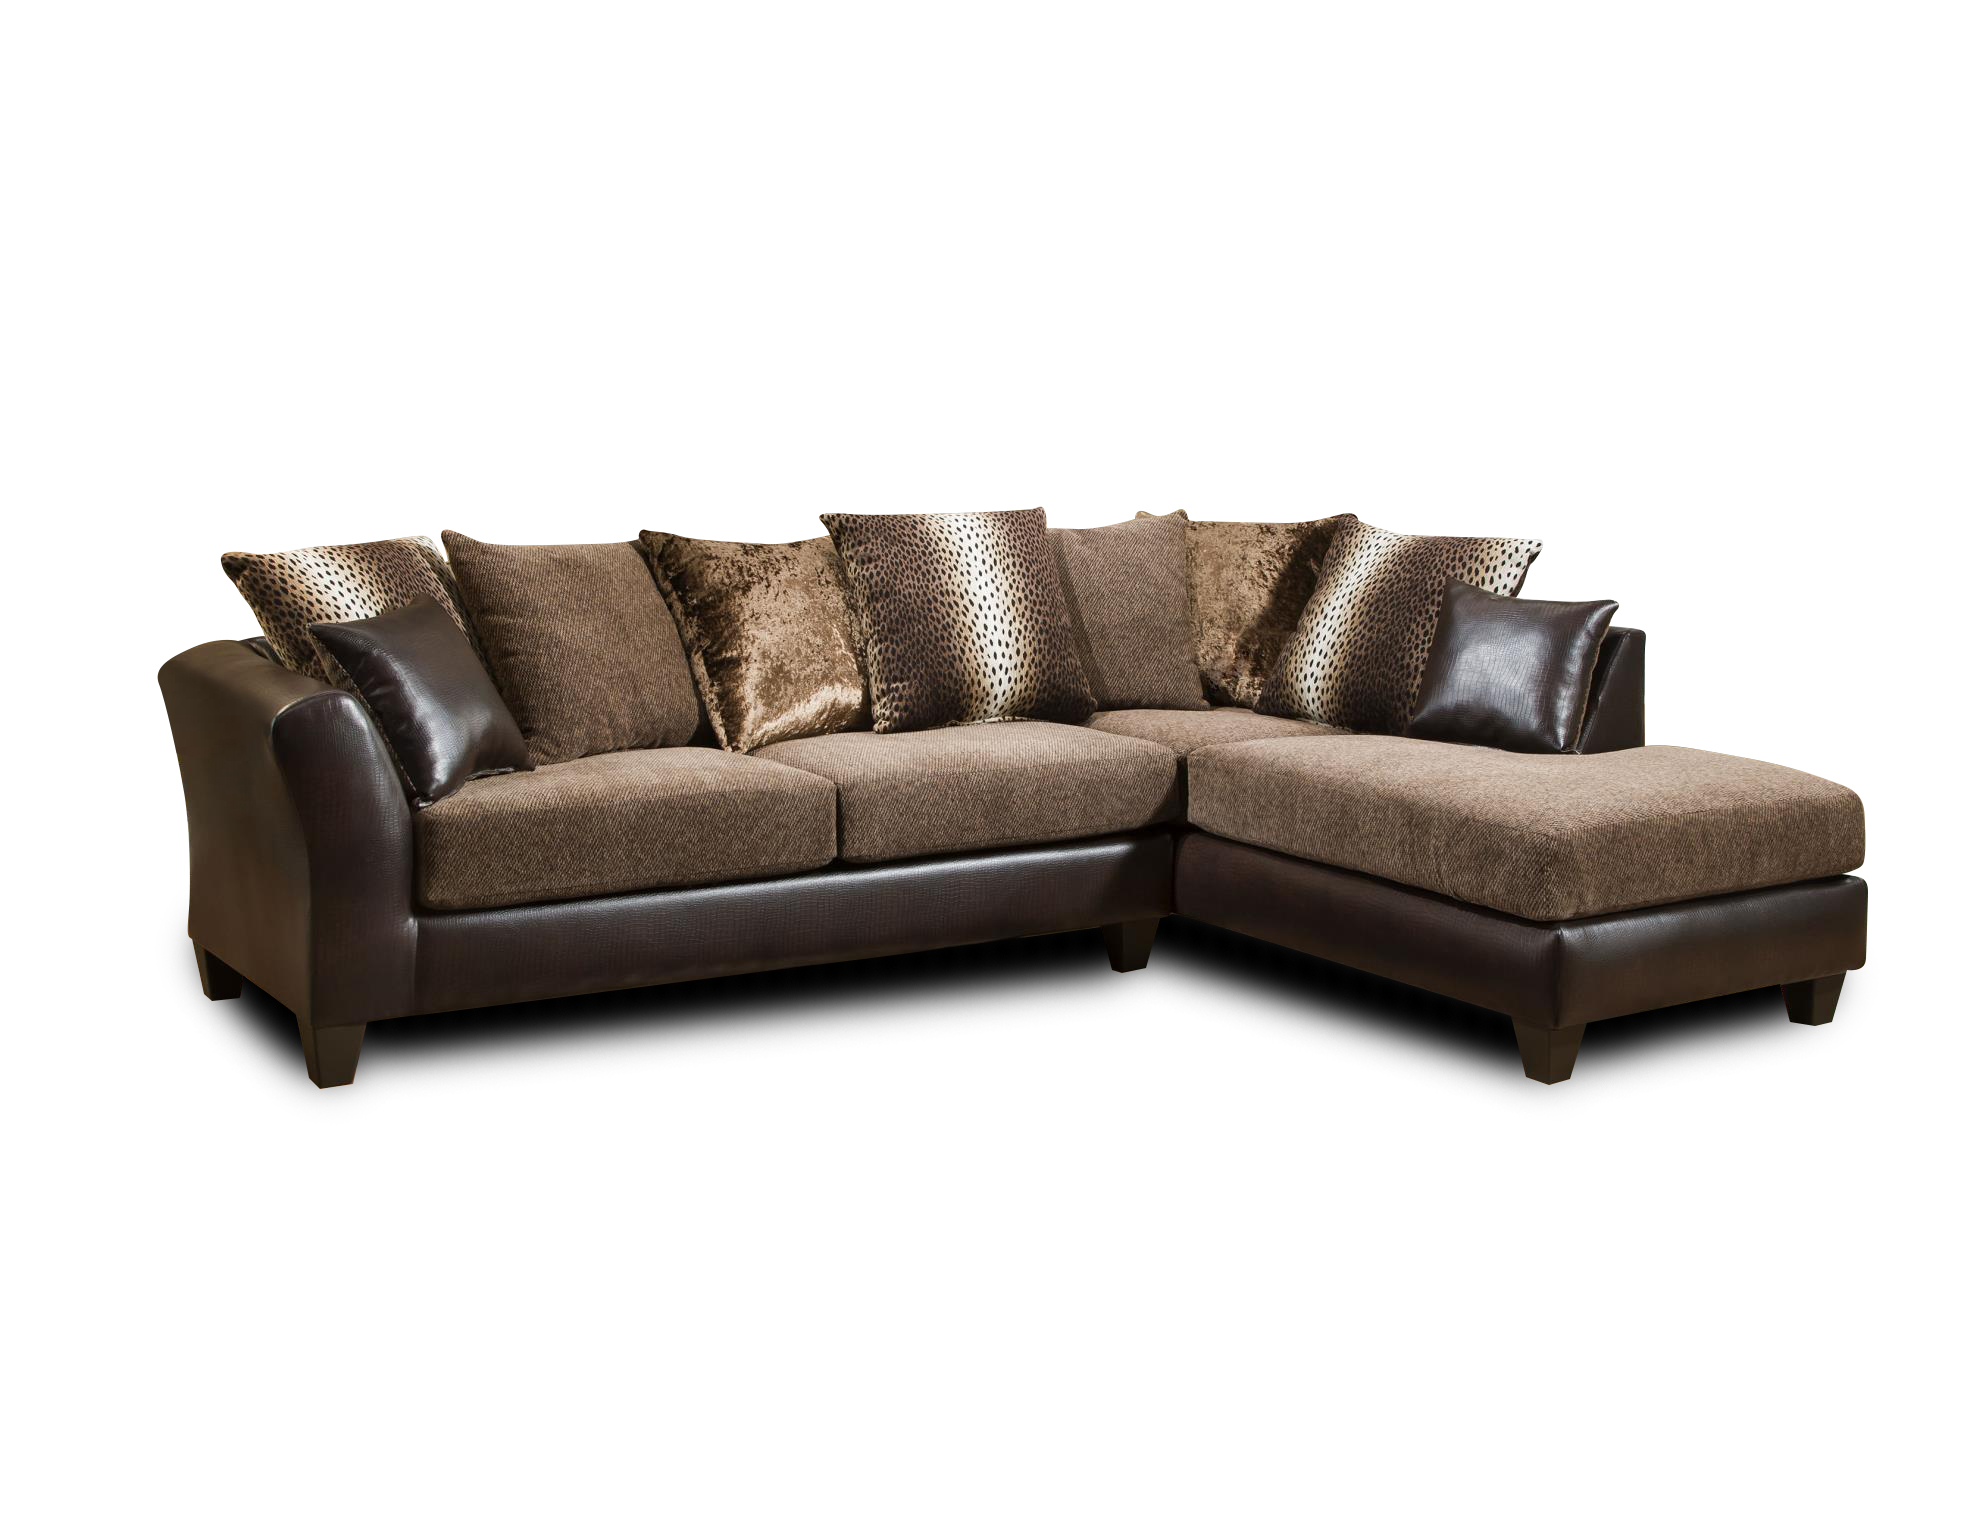 109" X 77" X 37" Dundee Brown Kali Mocha 100% Polyester Sectional